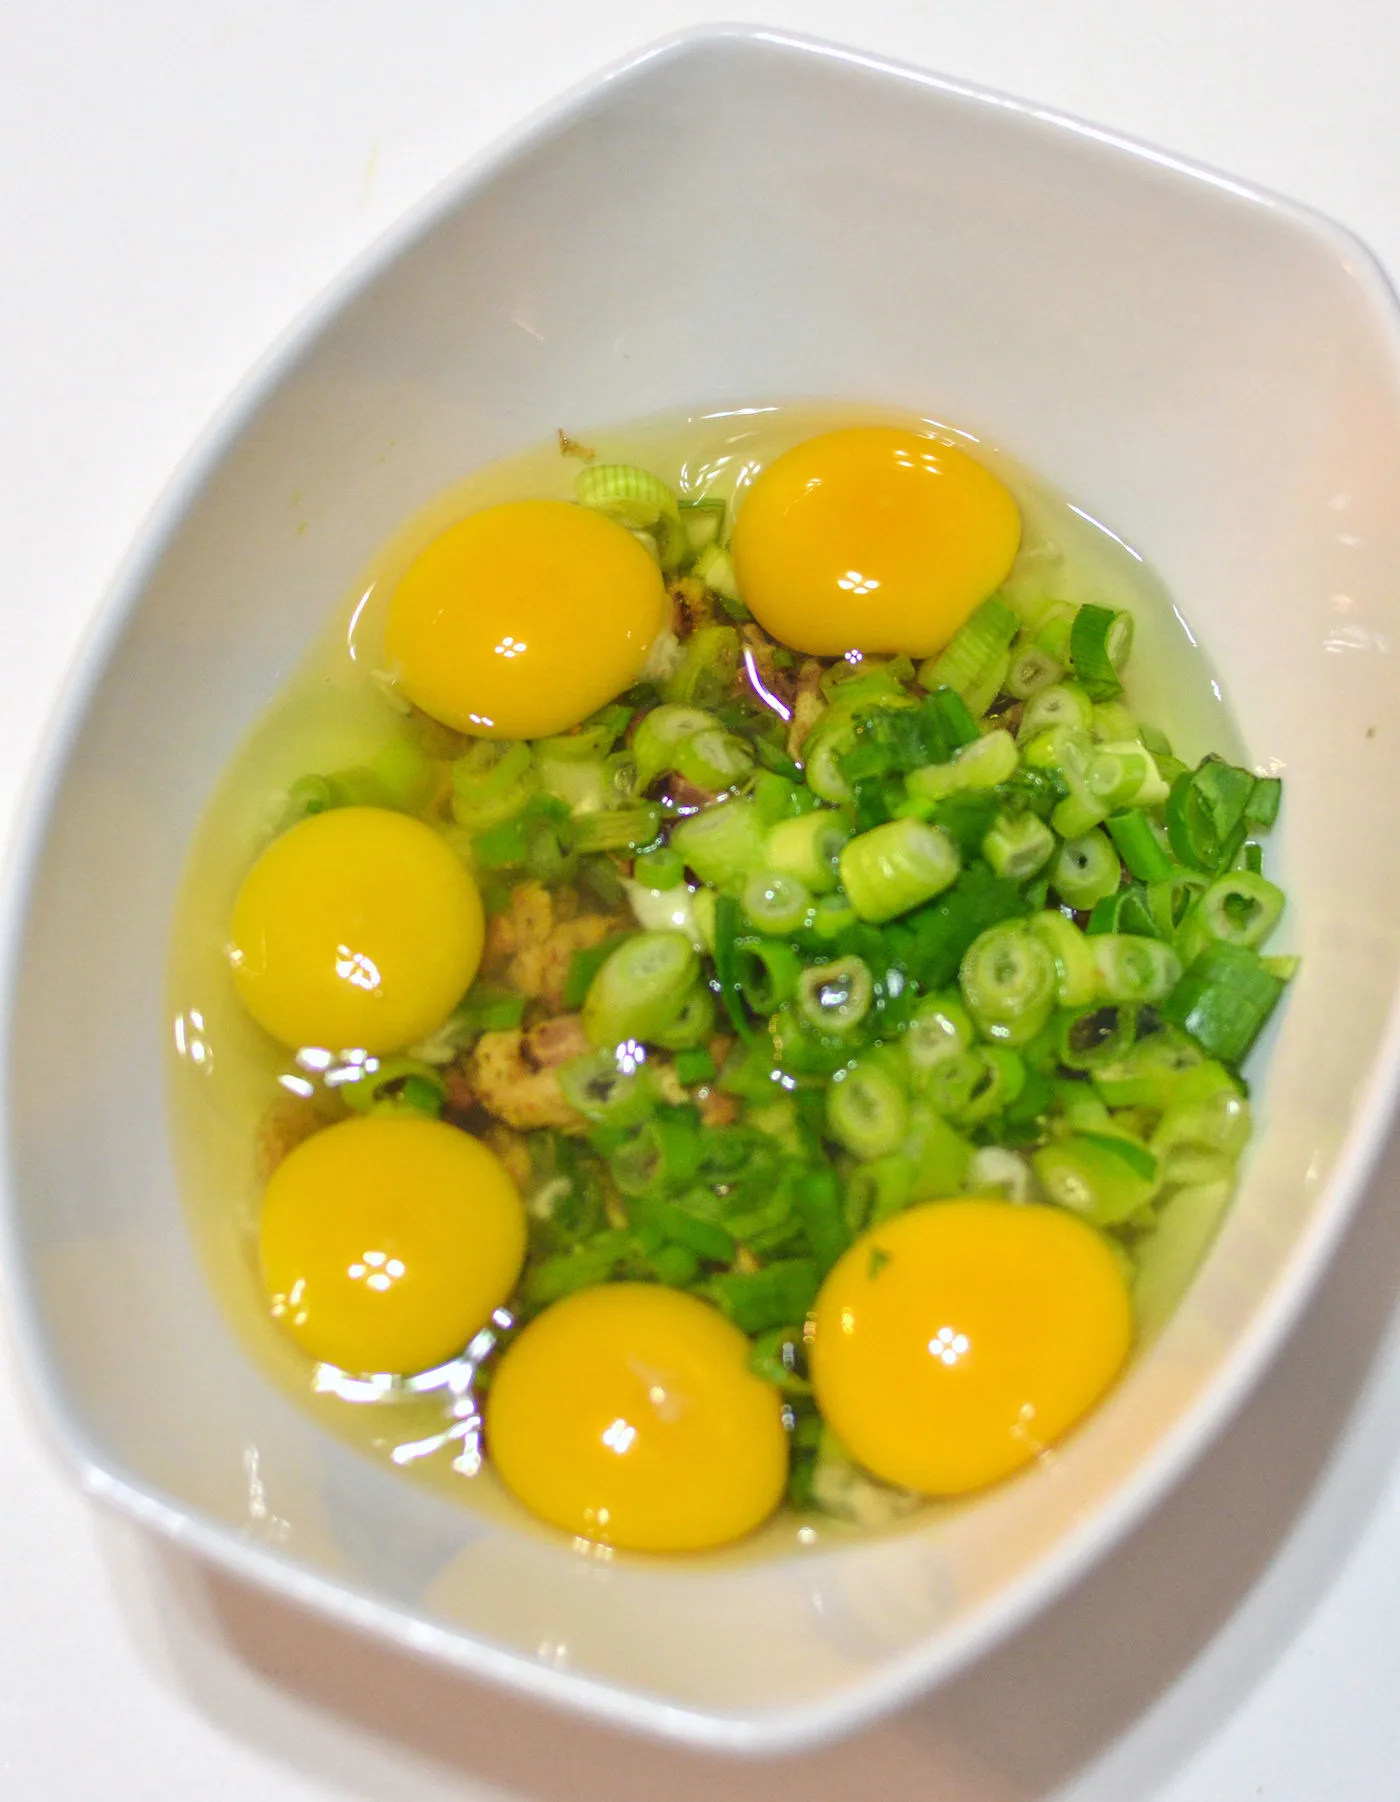 Yolks, green onions, meat, and other ingredients